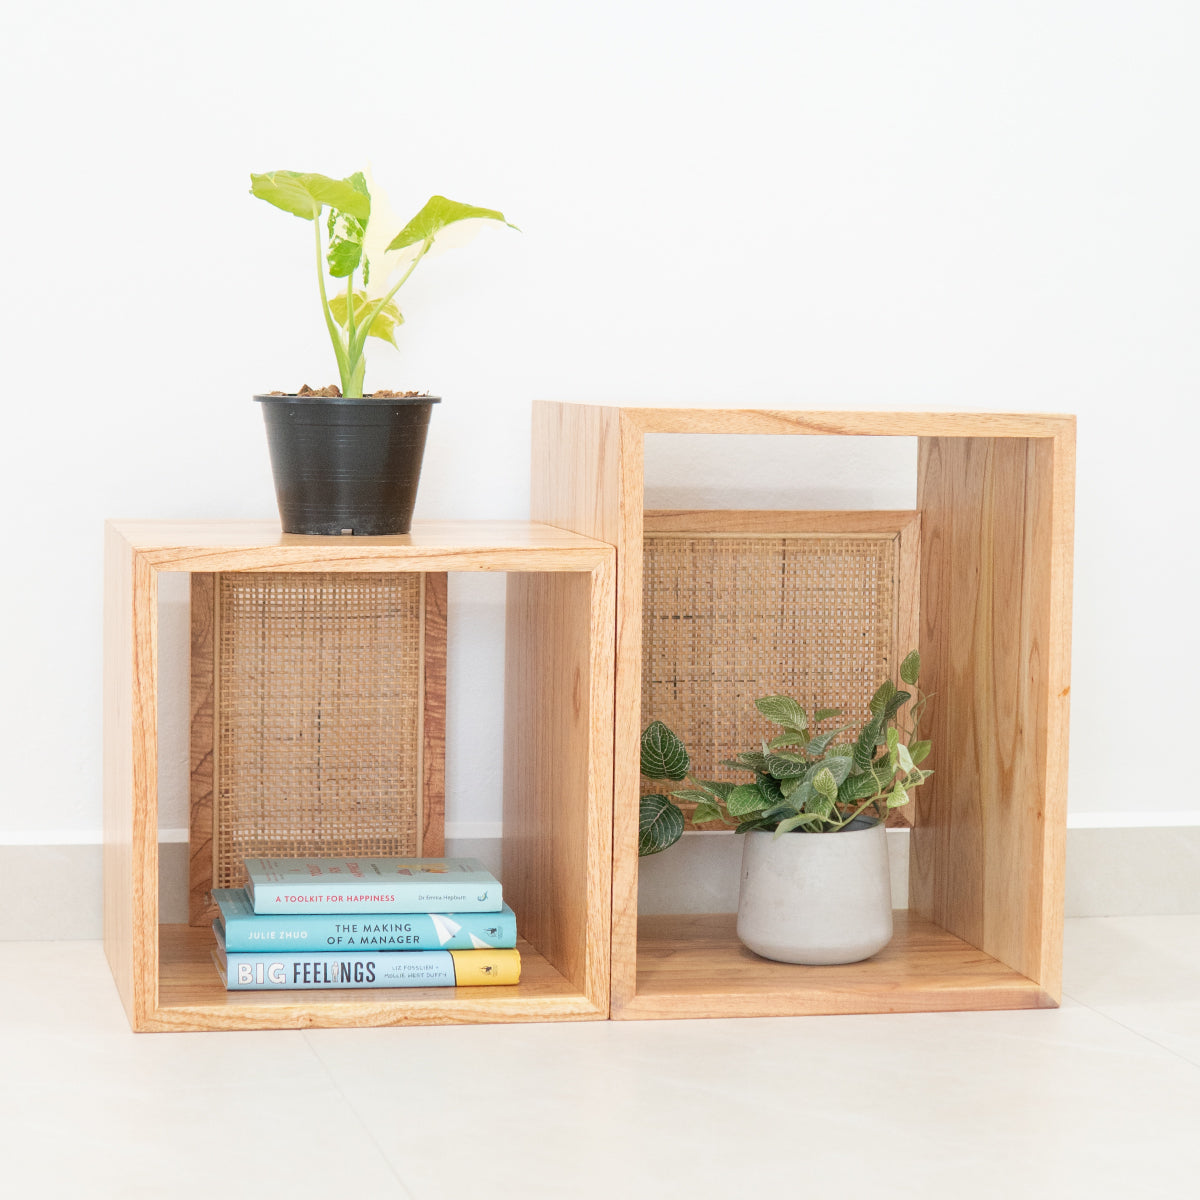 Summer's Modular Stackable Storage & Display Case (Elongated Small) | Shop Furniture Online On Kathy's Cove Singapore